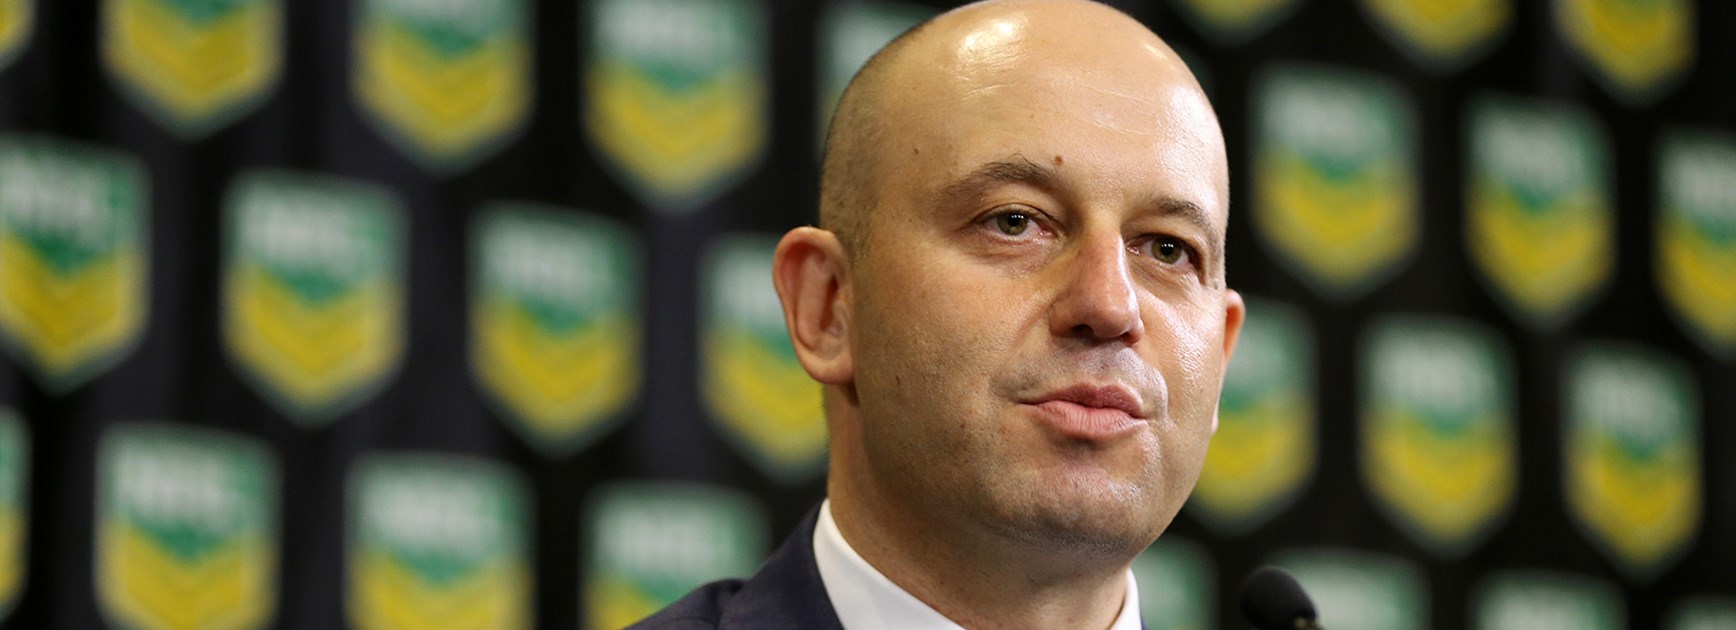 The NRL has announced Head of Football Todd Greenberg as its new CEO.